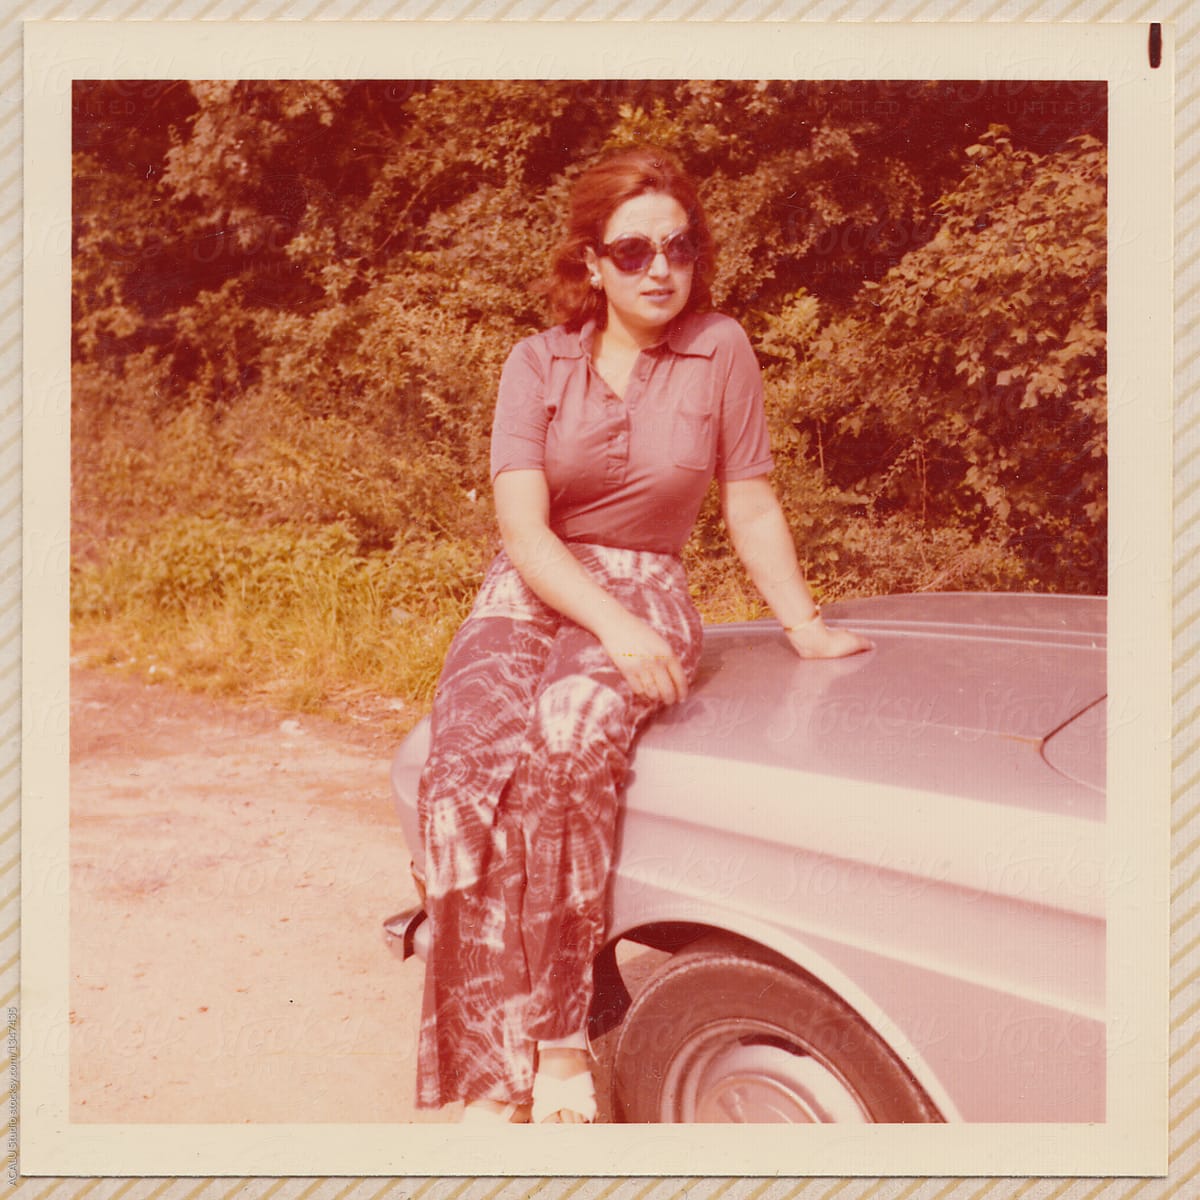 Old scanned photo of a woman on the hood of a car